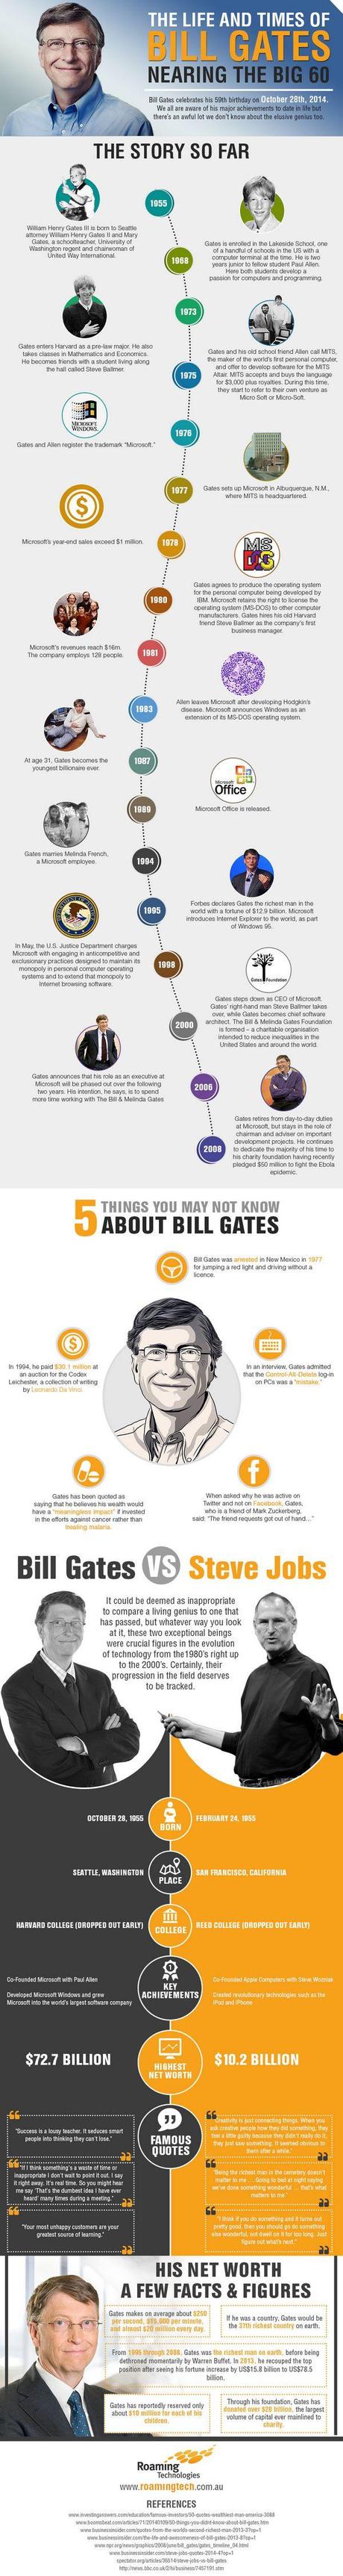 Bill-Gates-life-story-infographic